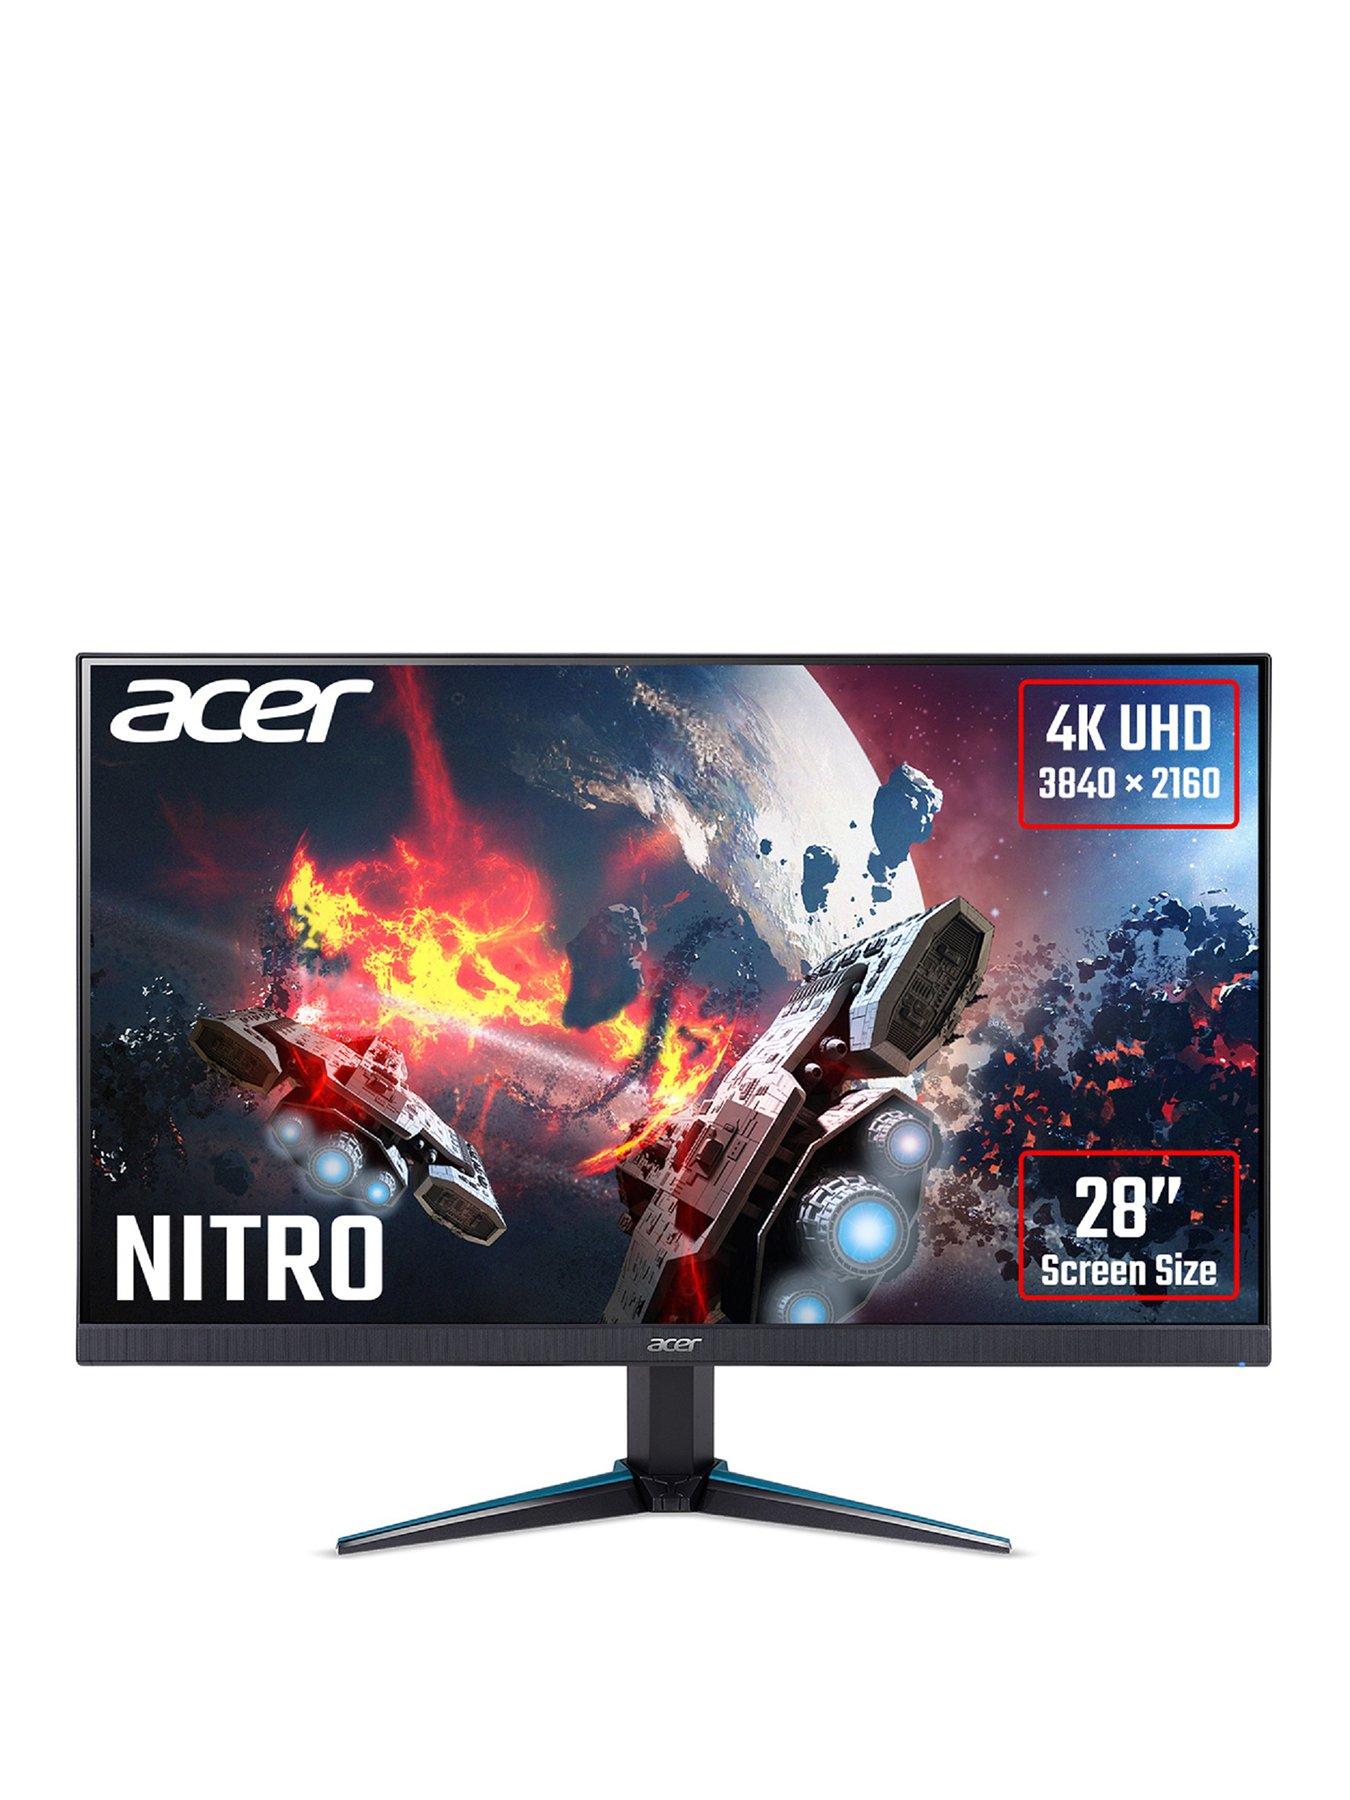 investering tekst besteden Monitors | Shop the Latest PC Monitors | Very.co.uk